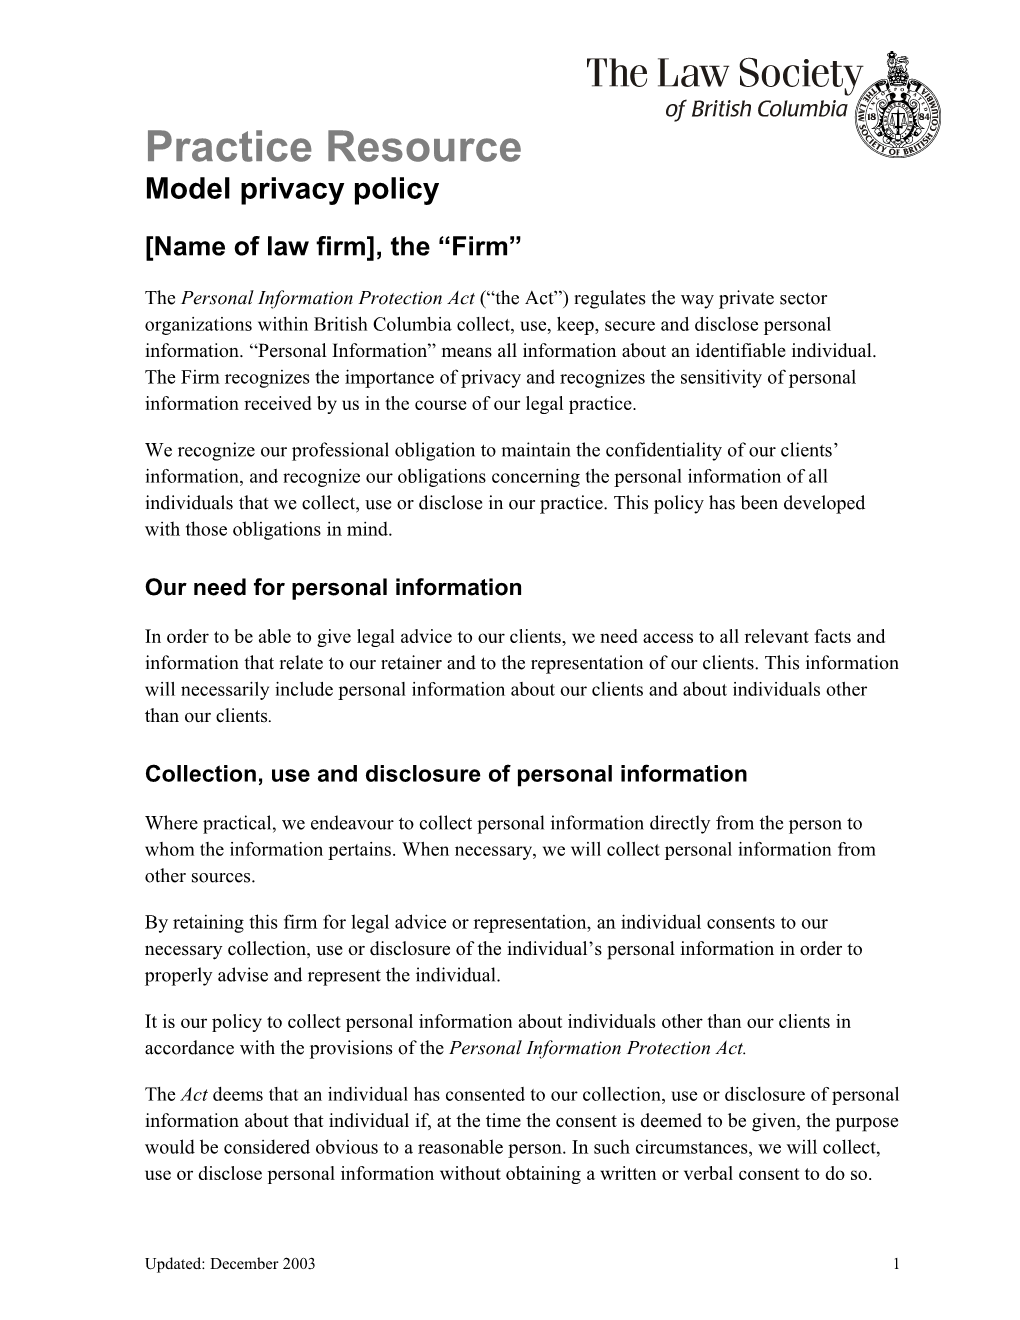 Practice Resources - Model Privacy Policy